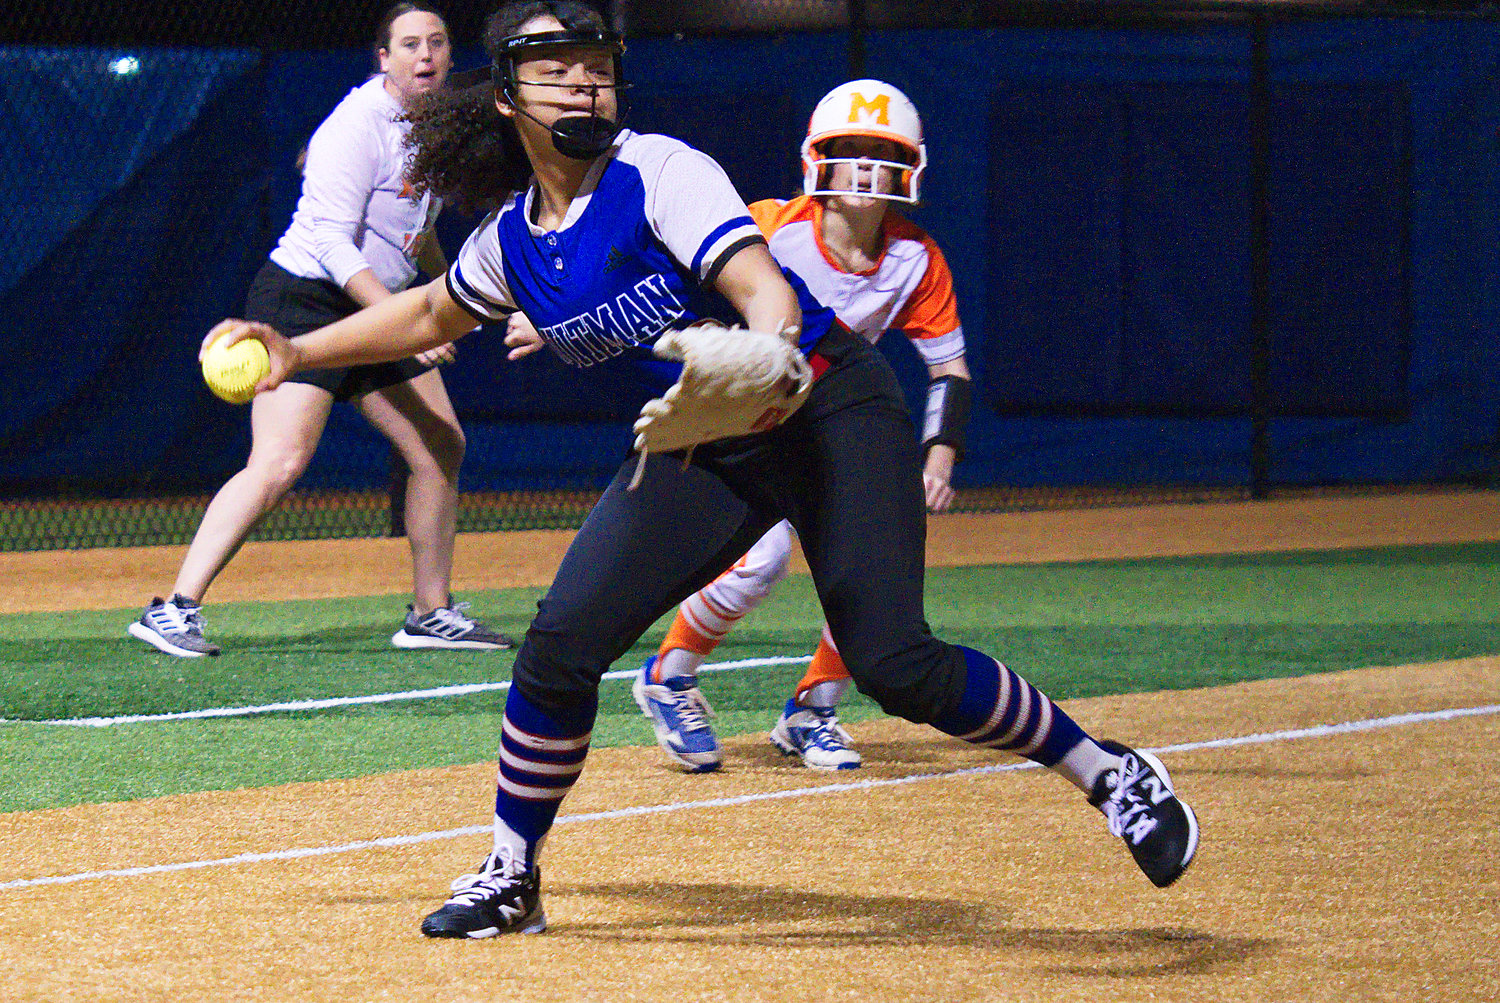 Ashely Davis of Quitman fakes a throw to first base before turning to trap the Mineola runner on third. The throw to third was dropped allowing the Mineola runner to score. (Monitor photo by Sam Major)